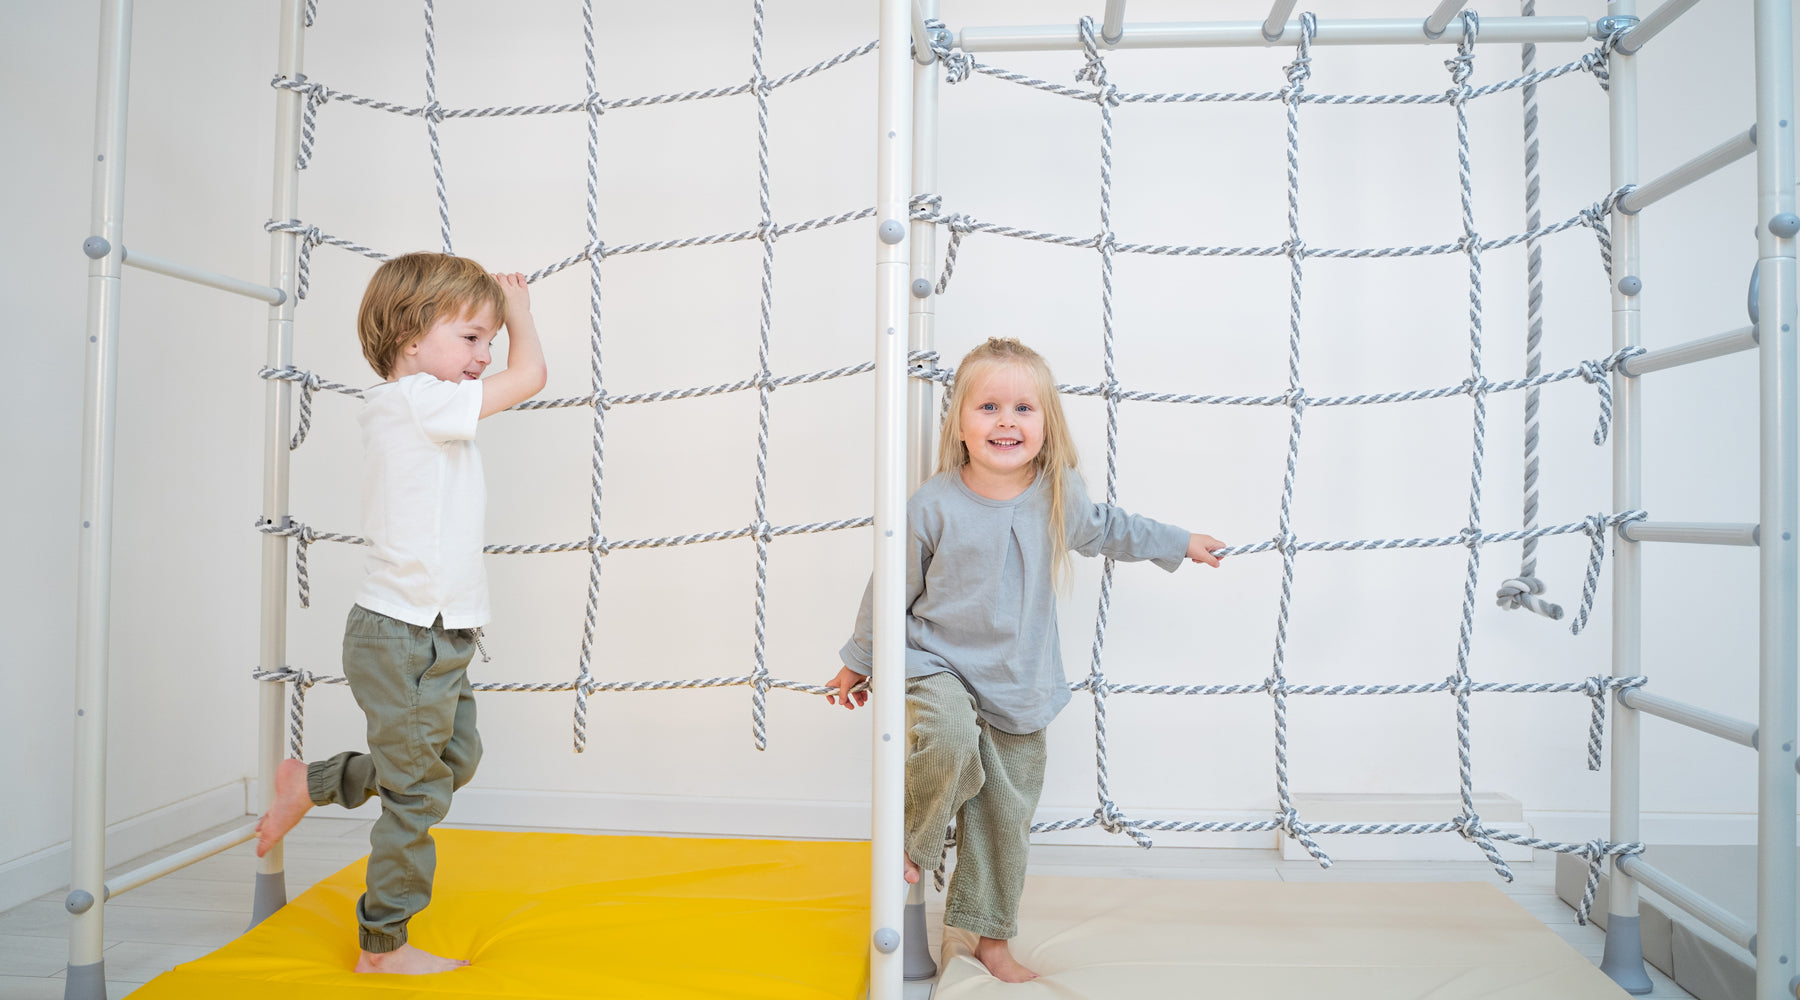 Toddlers playing in an indoor gym